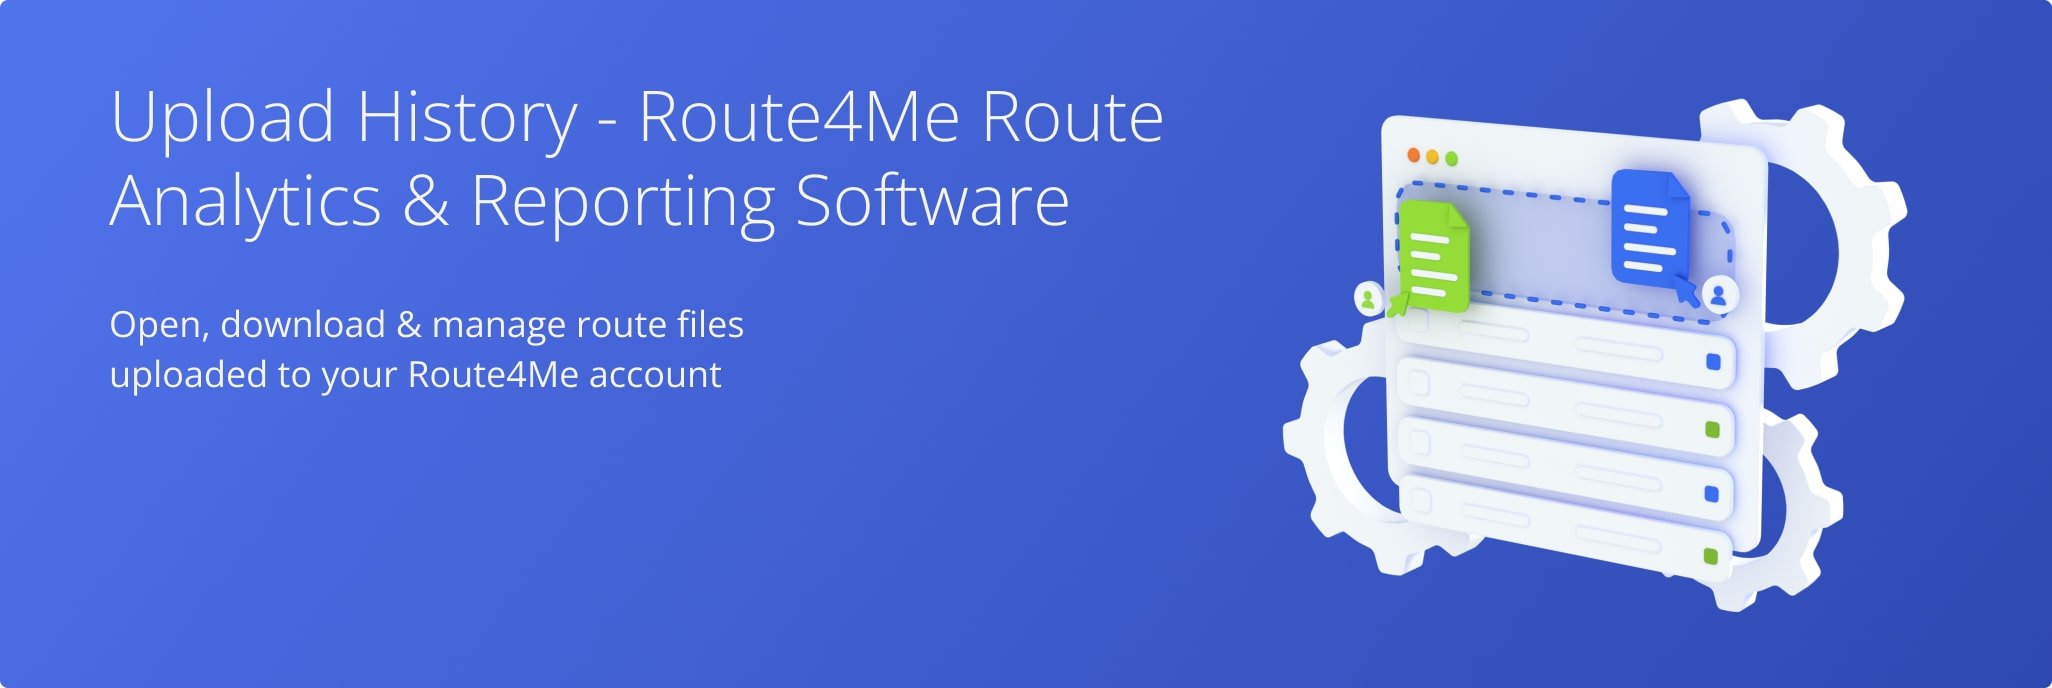 Open, download, and manage route files uploaded to your Route4Me account.